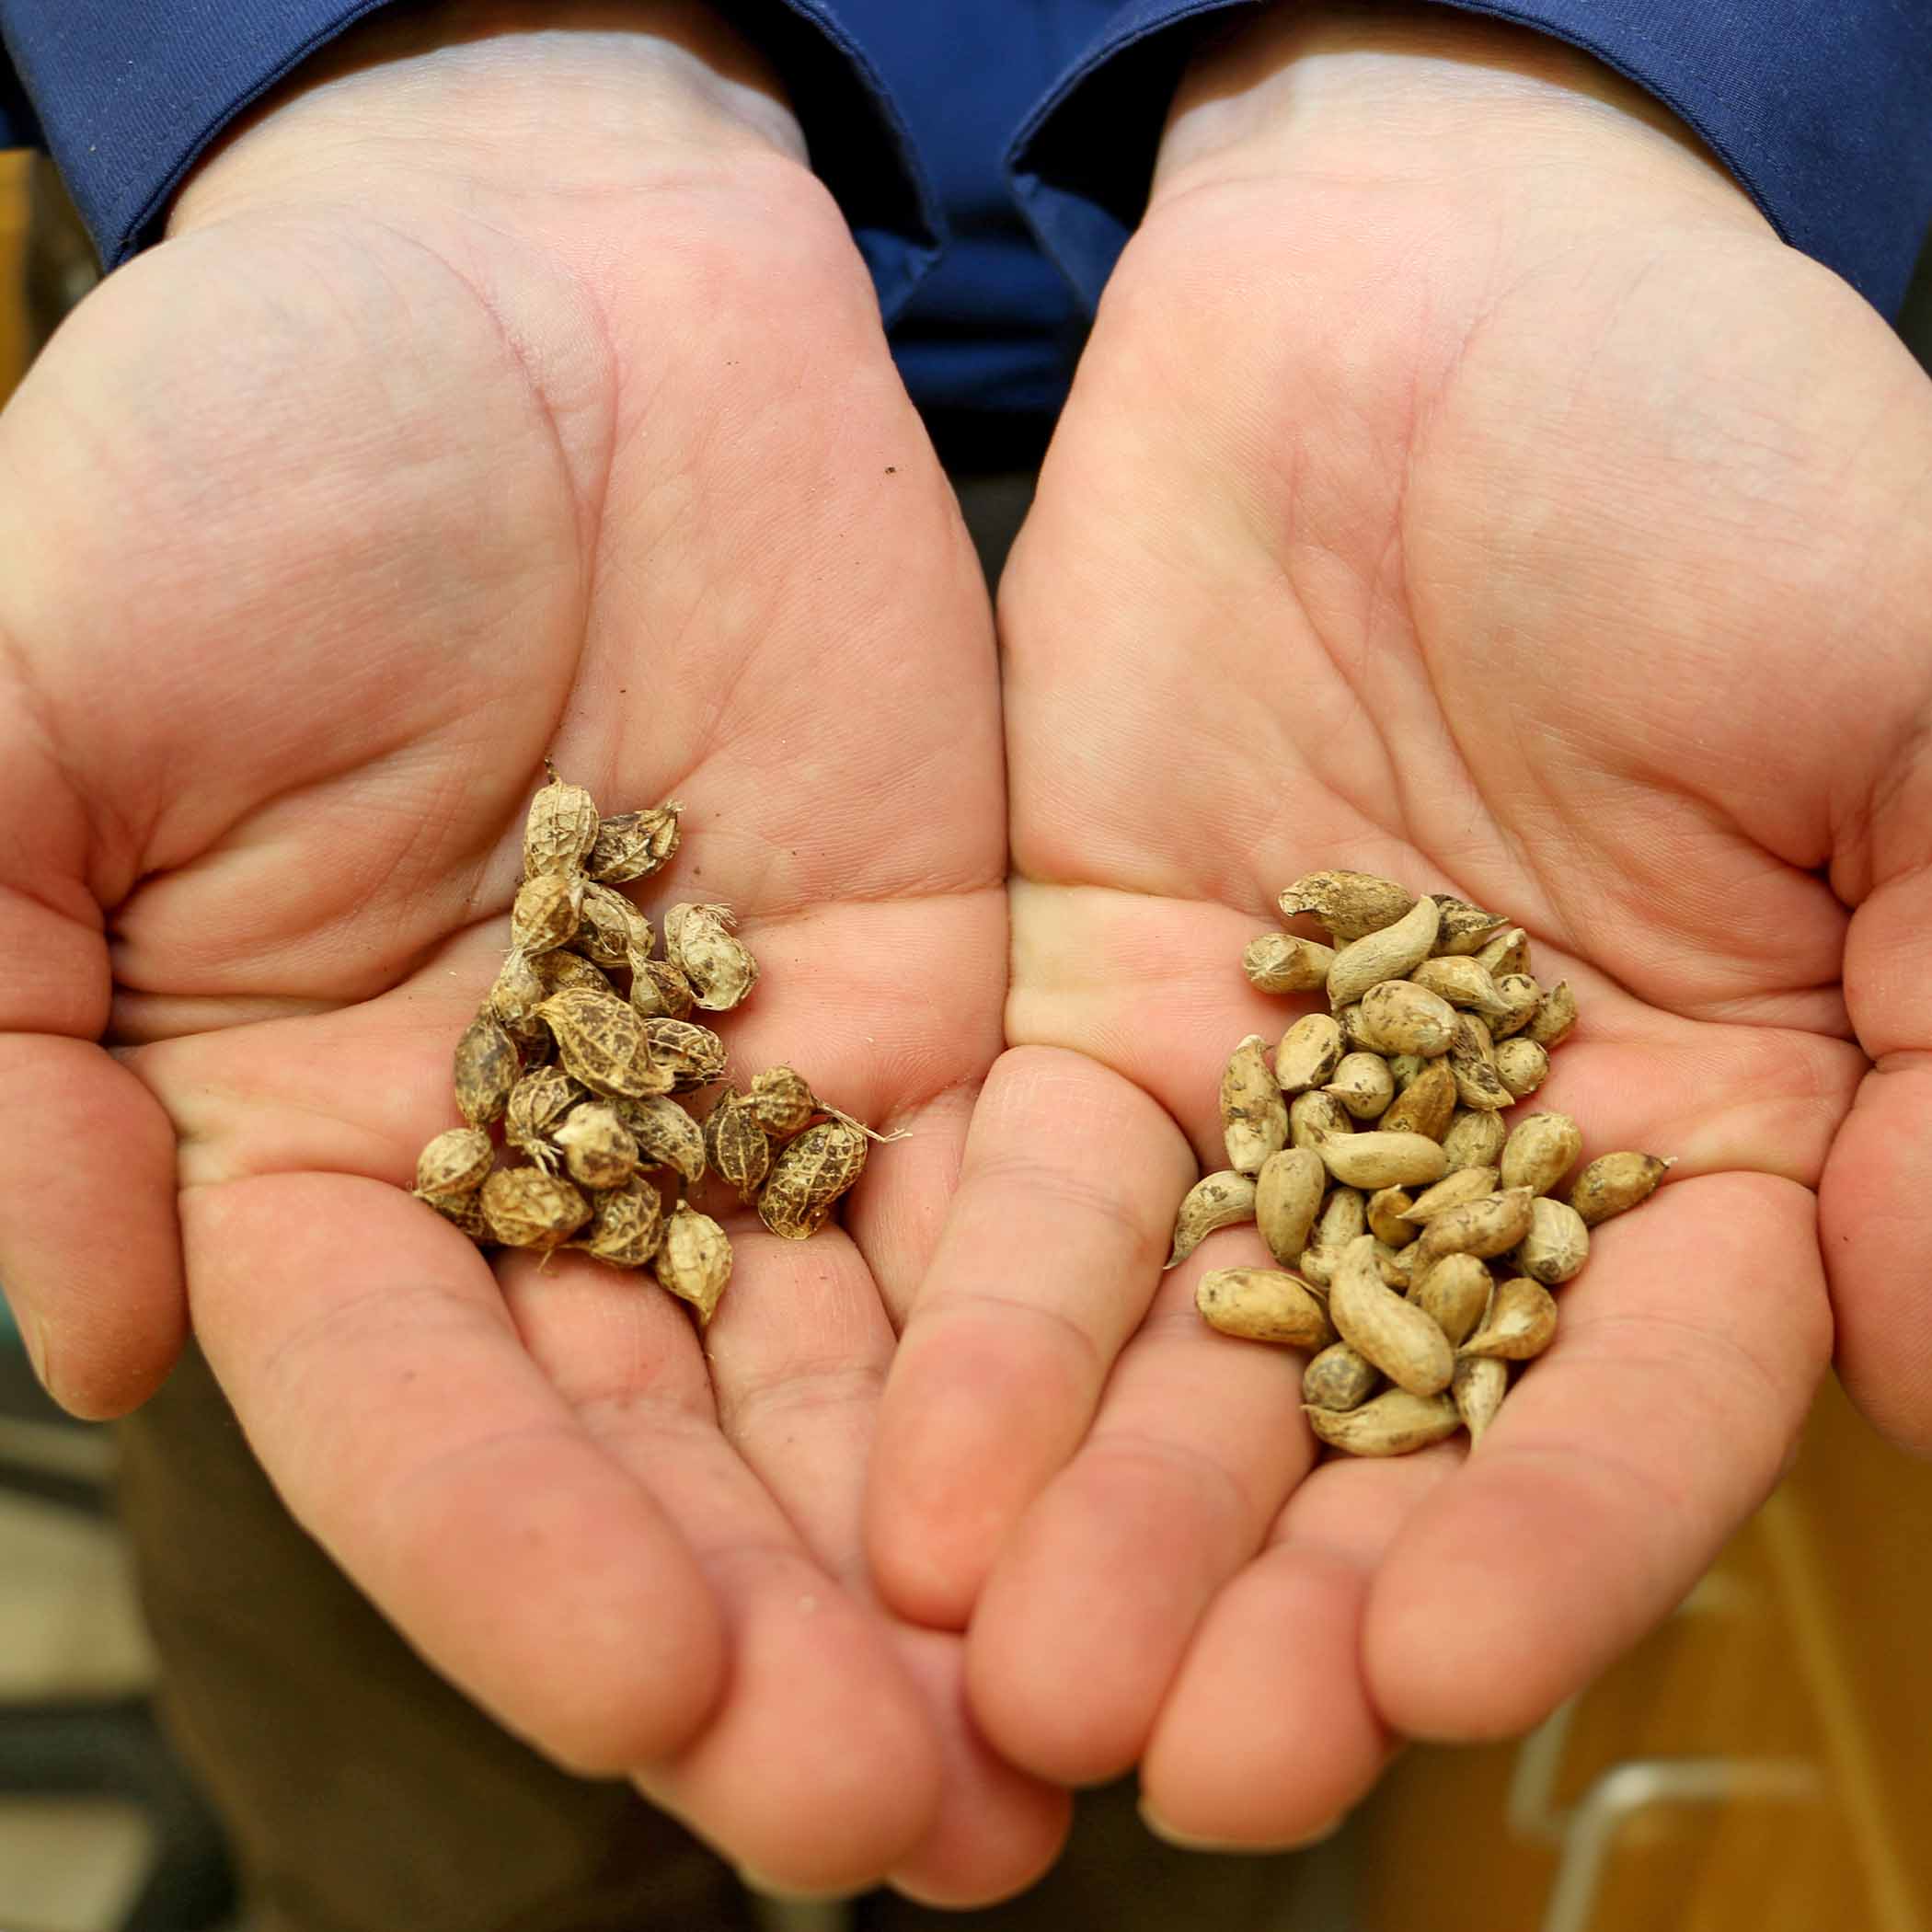 Arachis ipaensis, left, and Arachis duranensis, right, are the two species of wild peanut that crossed to provide the genetic blueprint for today's modern peanut varieties.